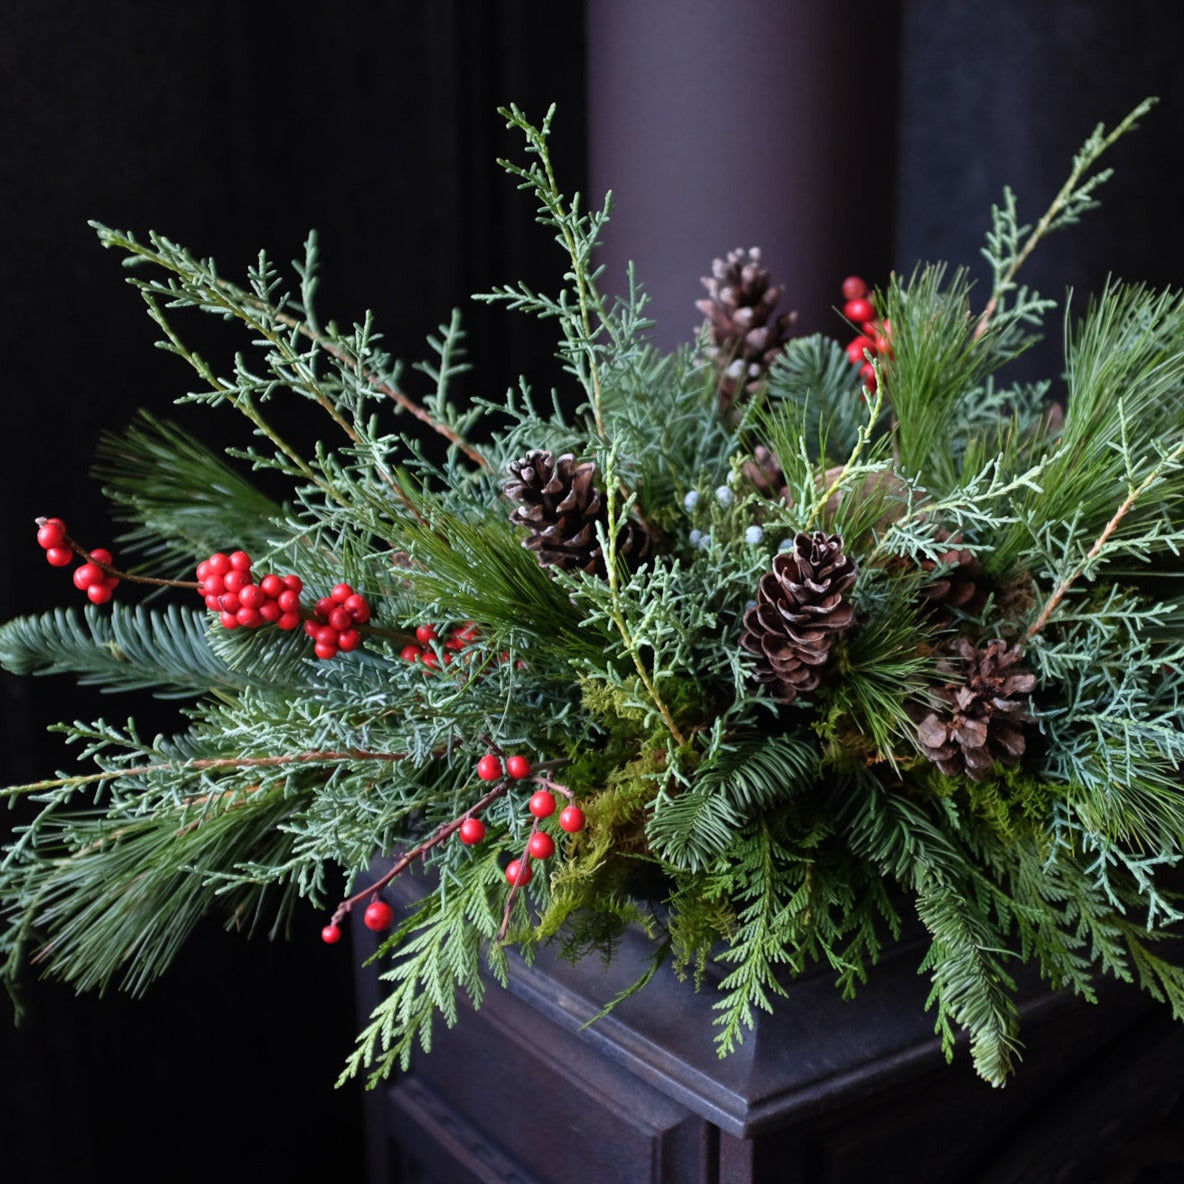 Woodland Centerpiece with moss, berries, pine cones and cedar.